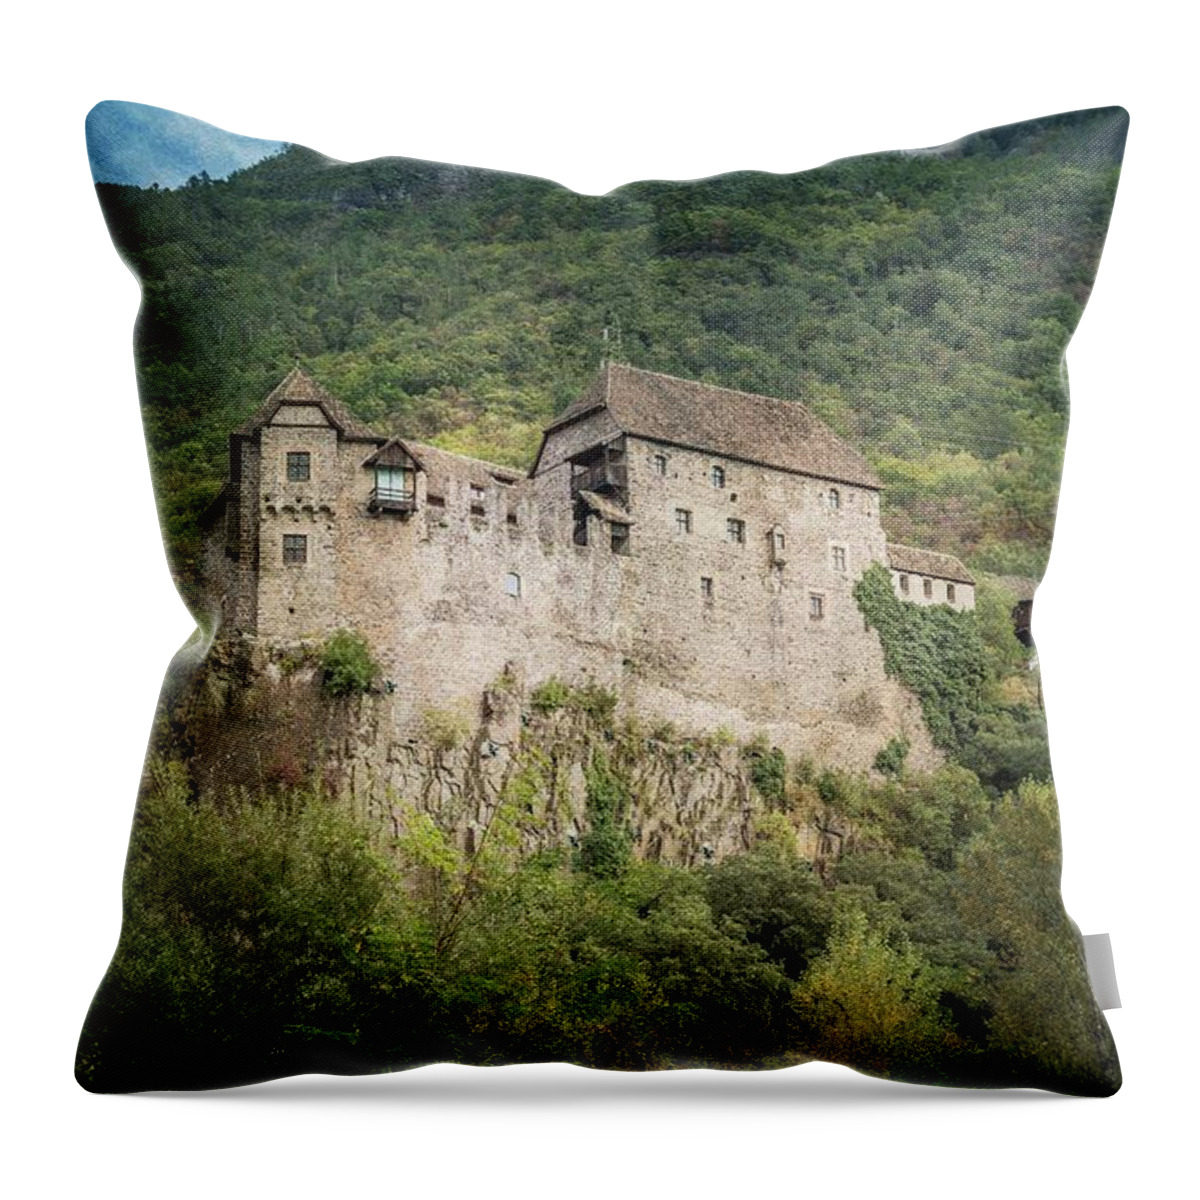 Castel Roncolo Throw Pillow featuring the photograph Castel Roncolo by Eva Lechner